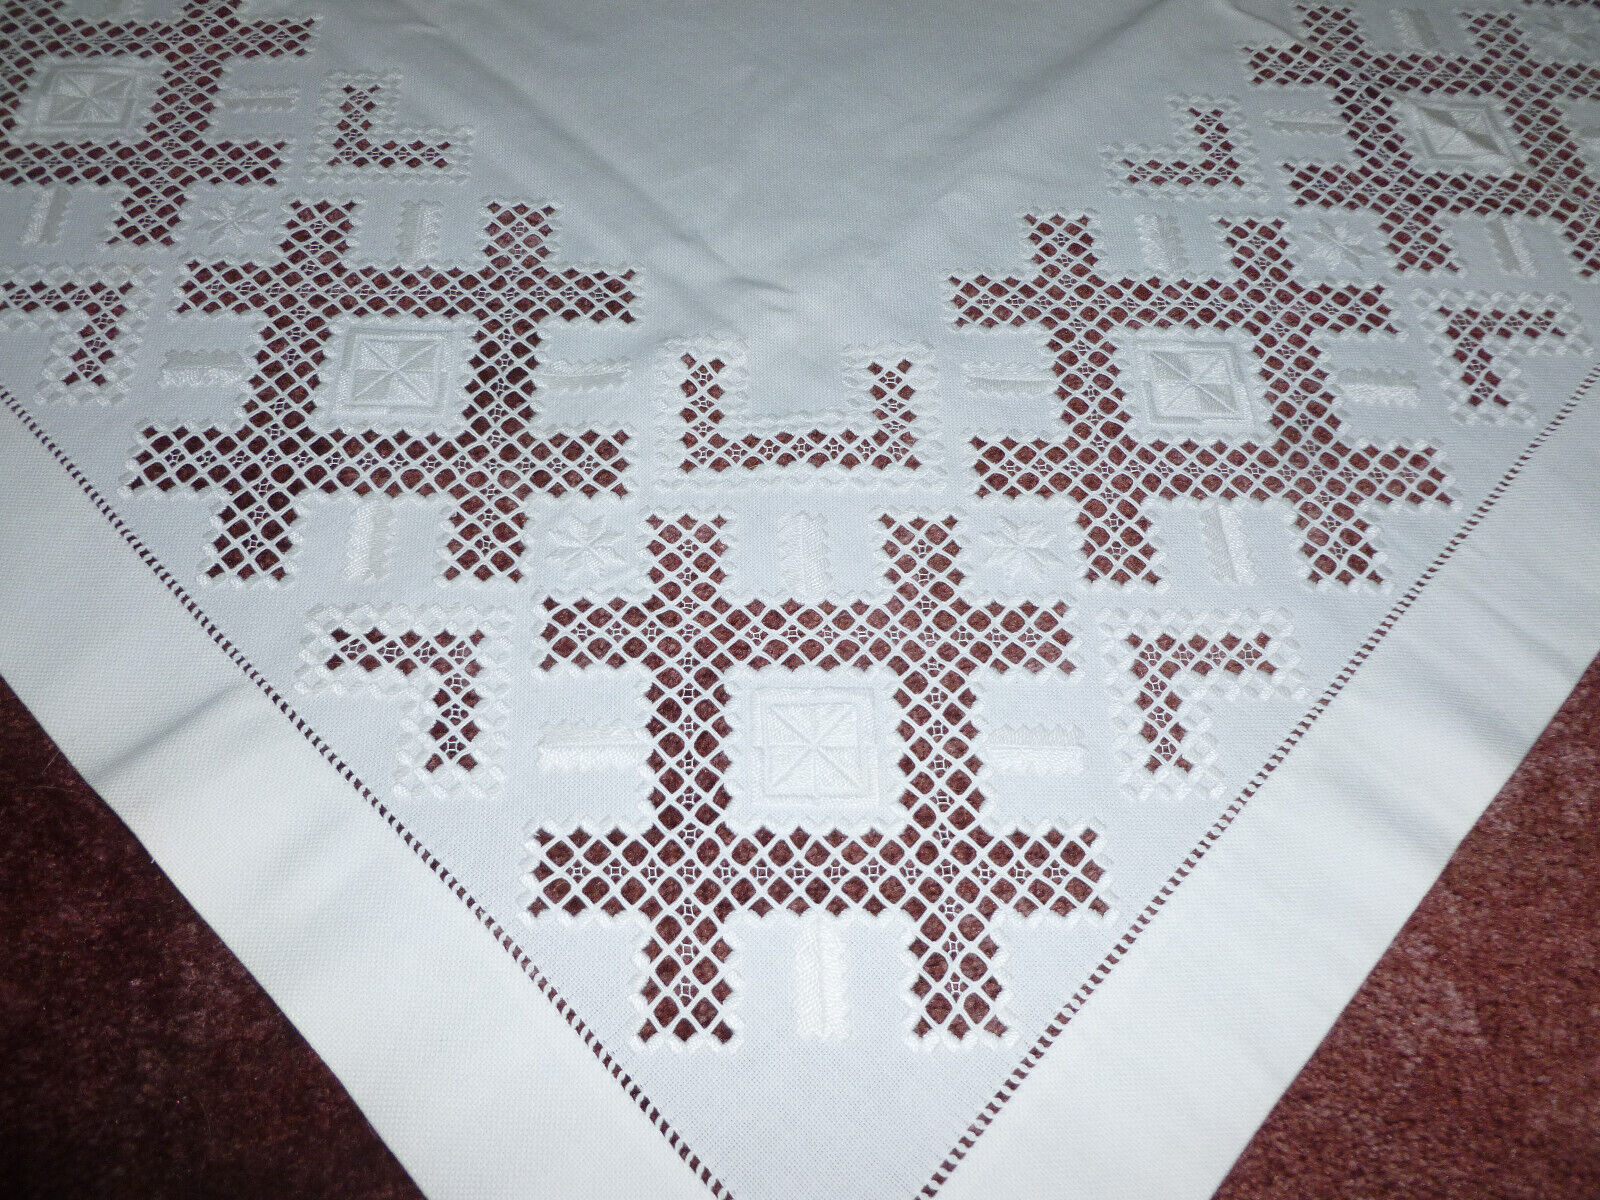 Antique Tablecloth Hardanger Lace Vintage Hand Embroidery Extravagant